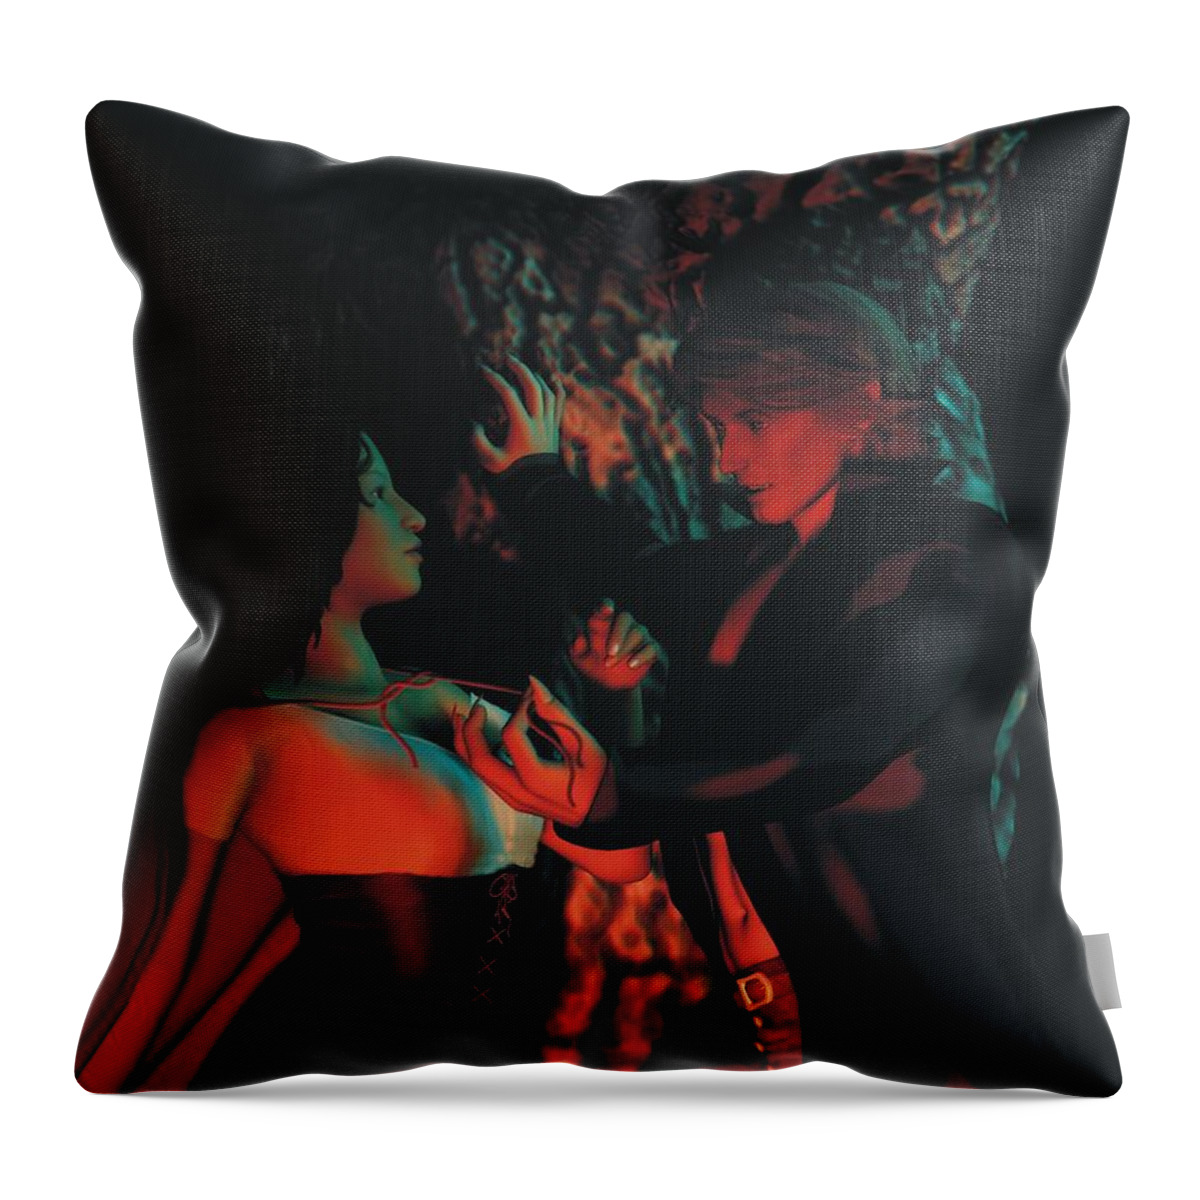 Red Riding Hood Throw Pillow featuring the painting Sweetest Tongue Has Sharpest Tooth 2 by Pet Serrano